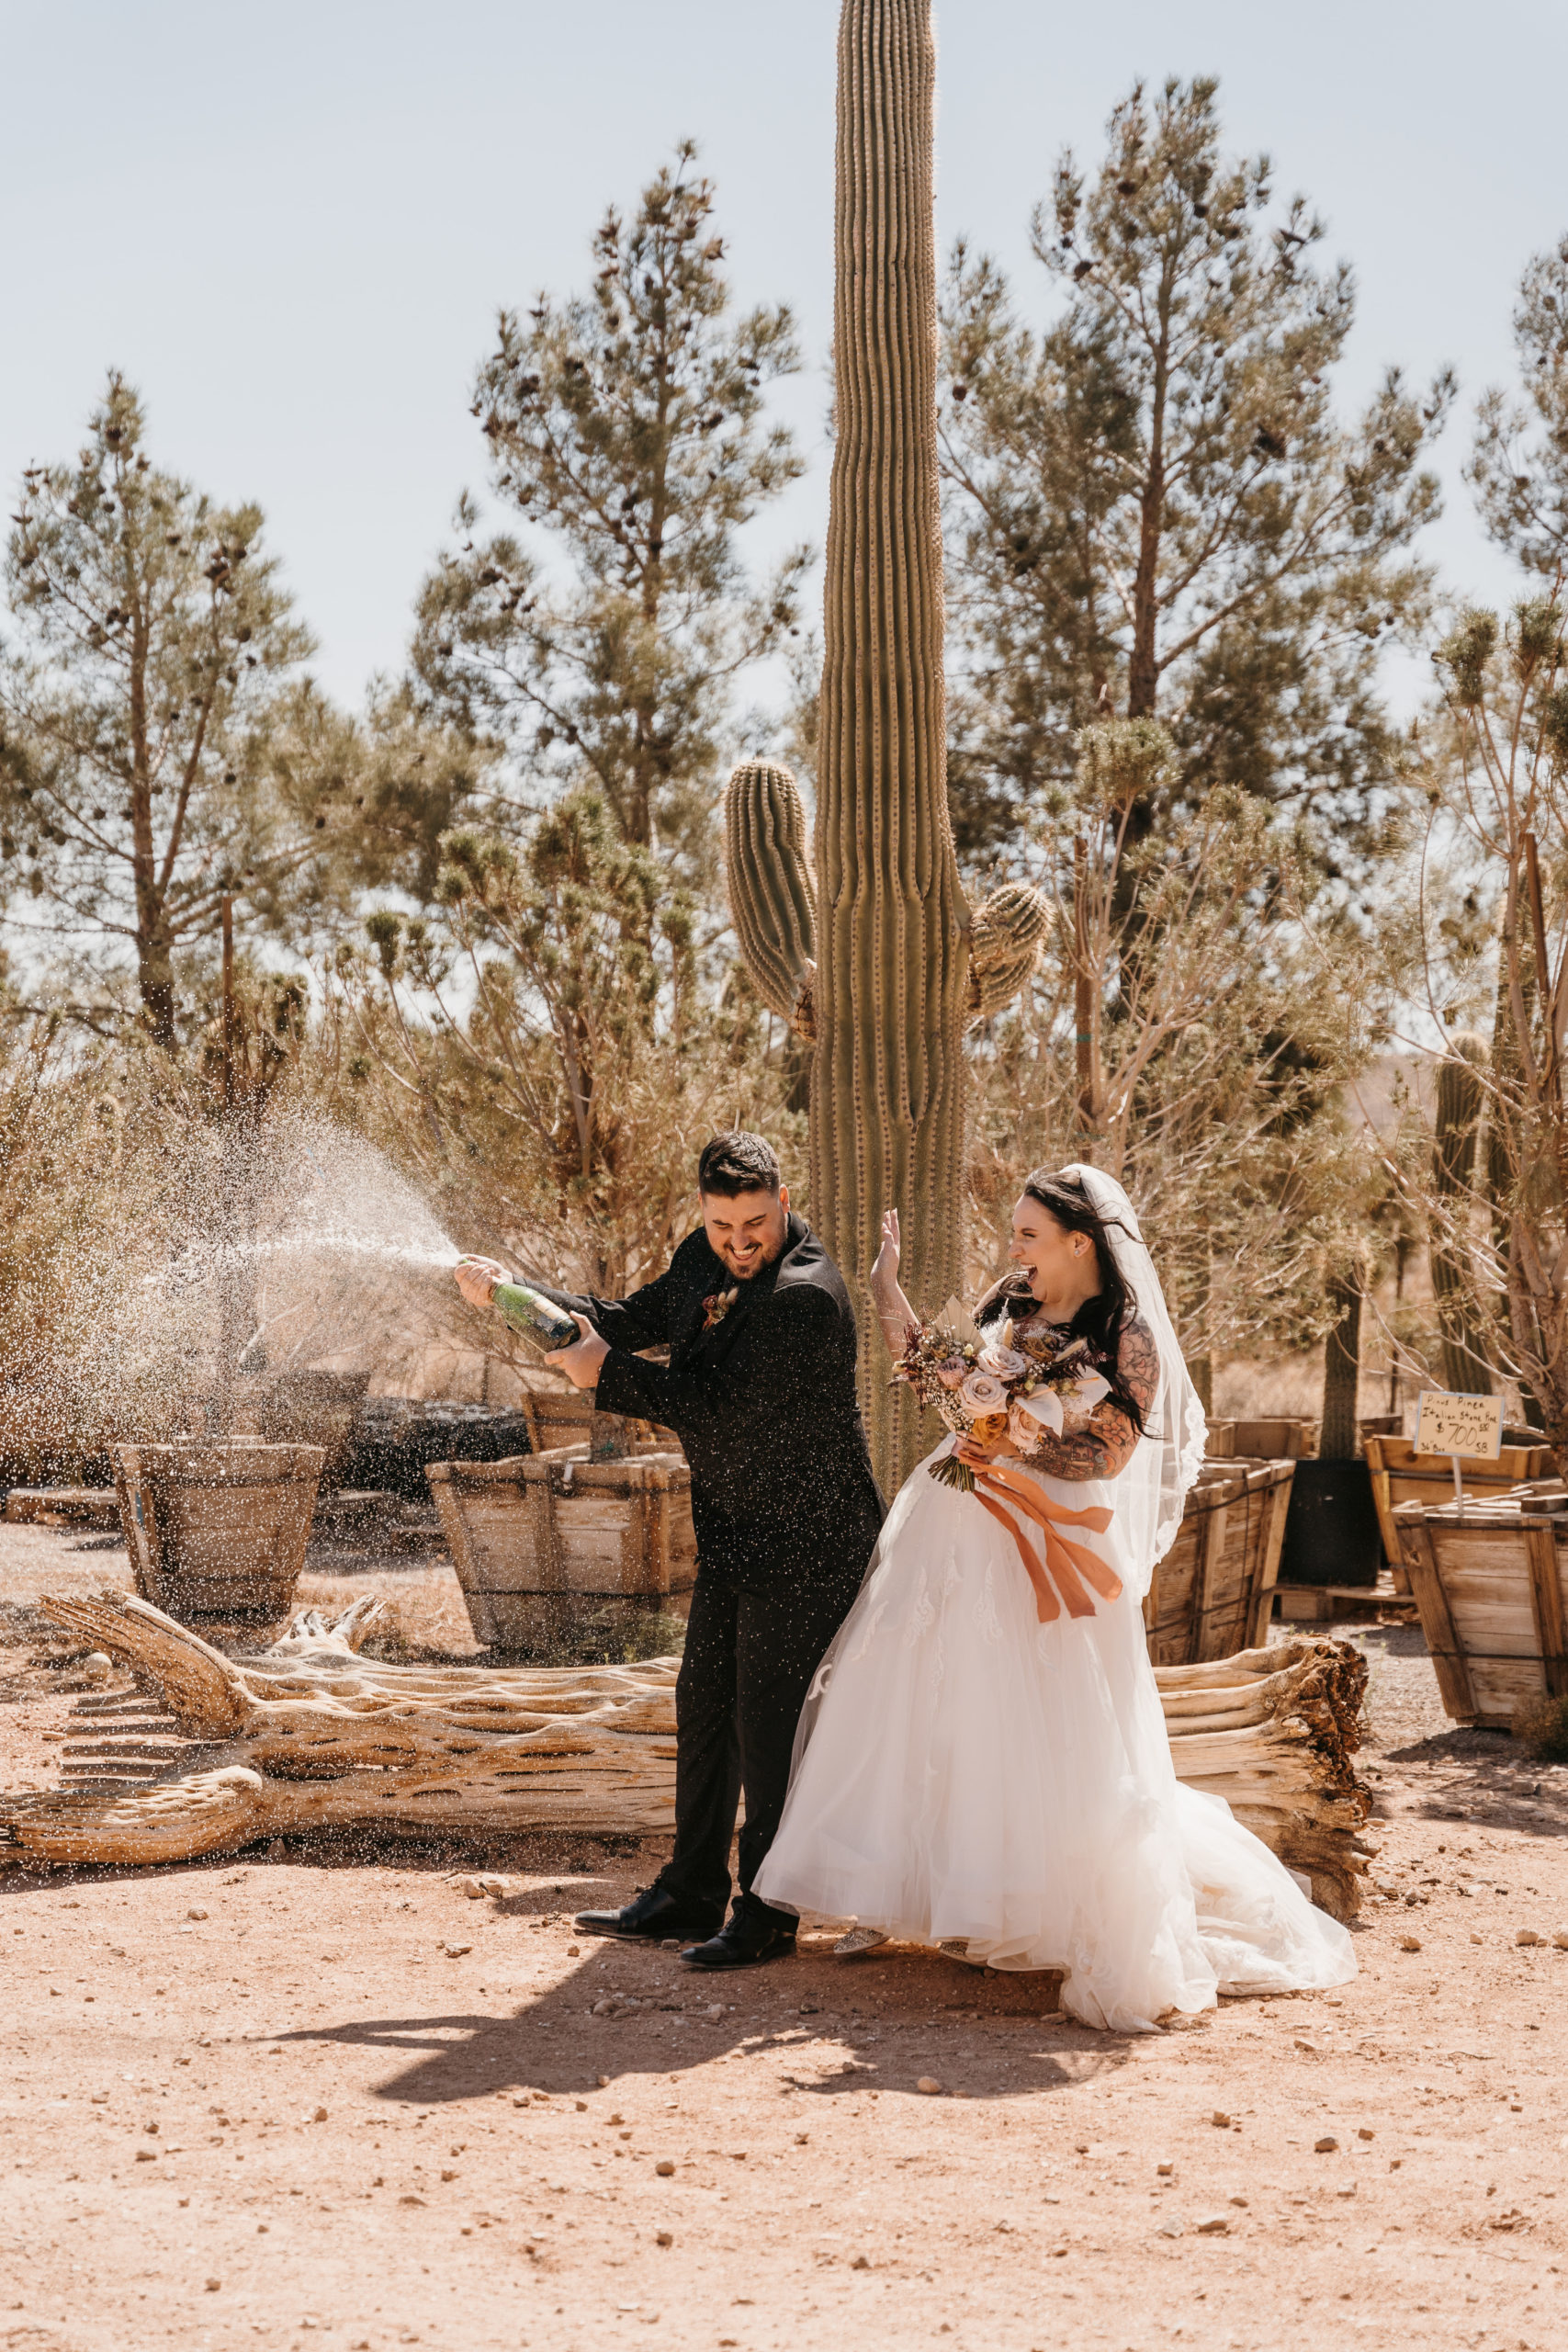 Champagne spray for newly wedded couple in Las Vegas desert 